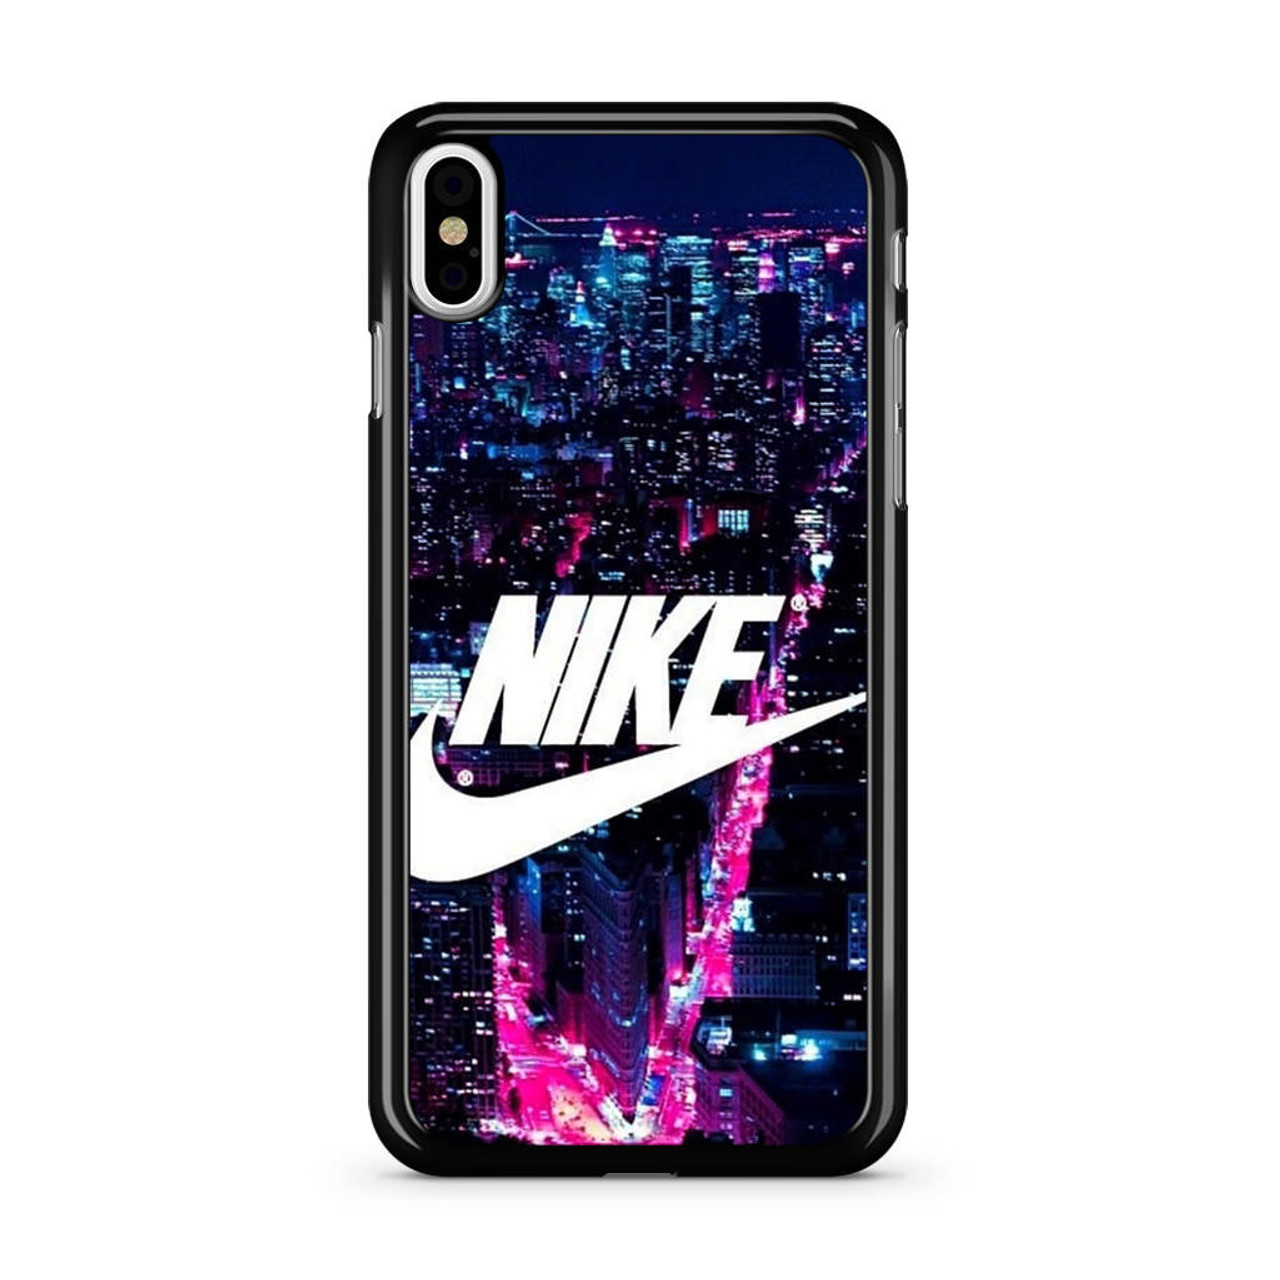 Nike Iphone Wallpapers HD | Fitness wallpaper iphone, Nike wallpaper,  Fitness wallpaper